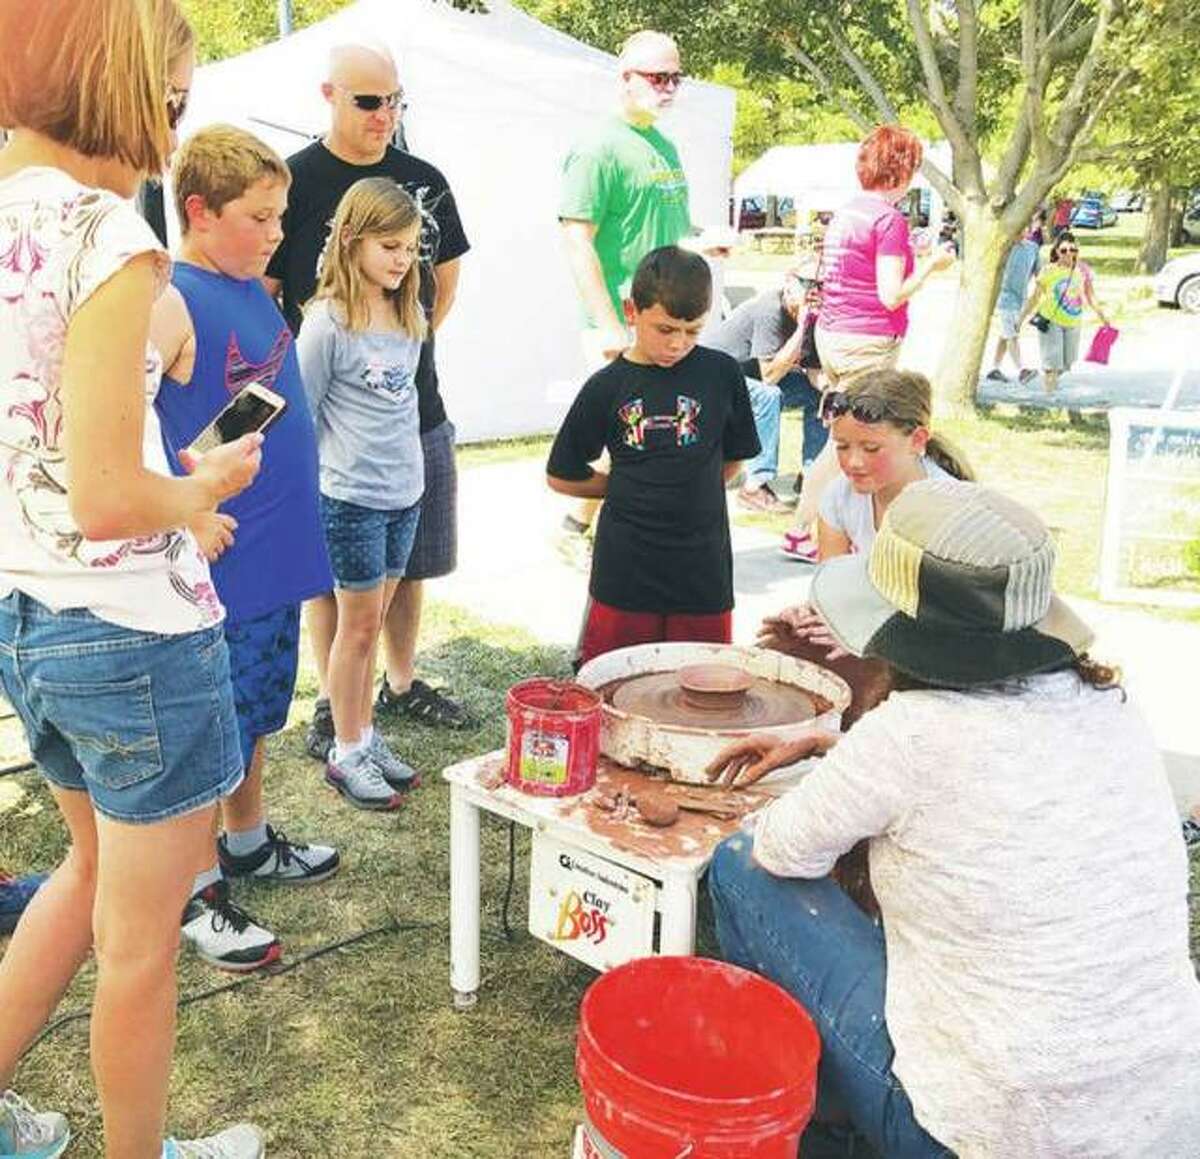 Activities will be available for children throughout the weekend, provided by the Grafton United Methodist Church, as seen here at a previous Art in the Park.